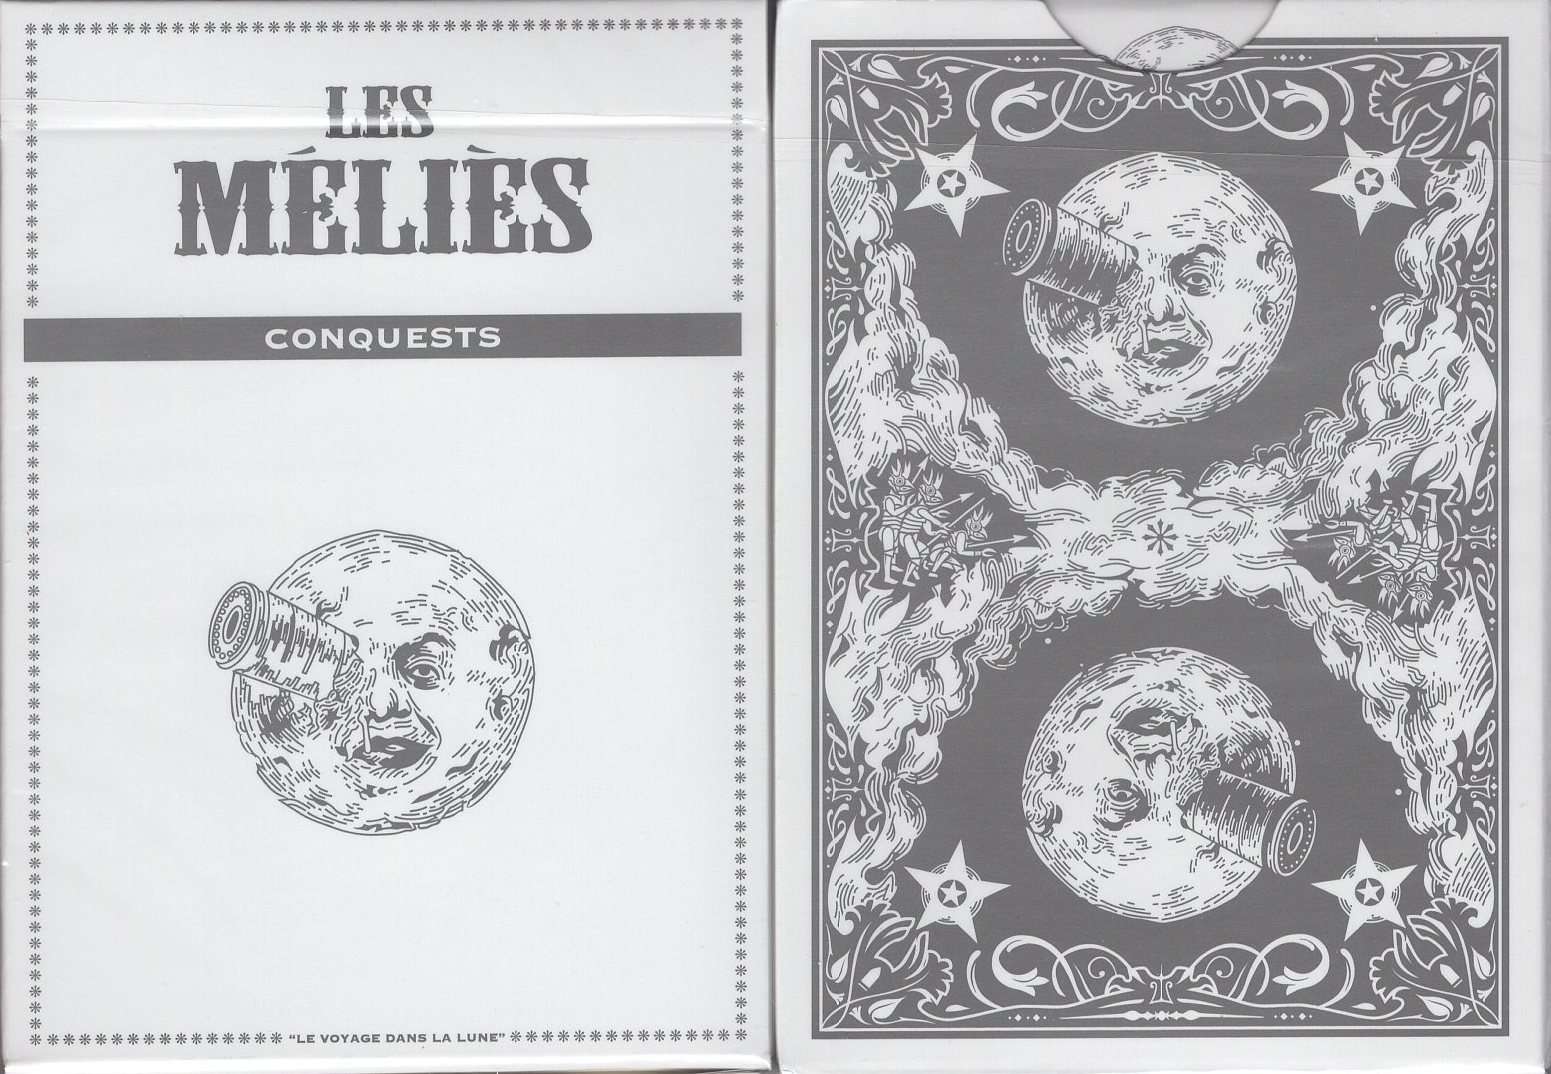 PlayingCardDecks.com-Les Melies Conquests White Playing Cards USPCC